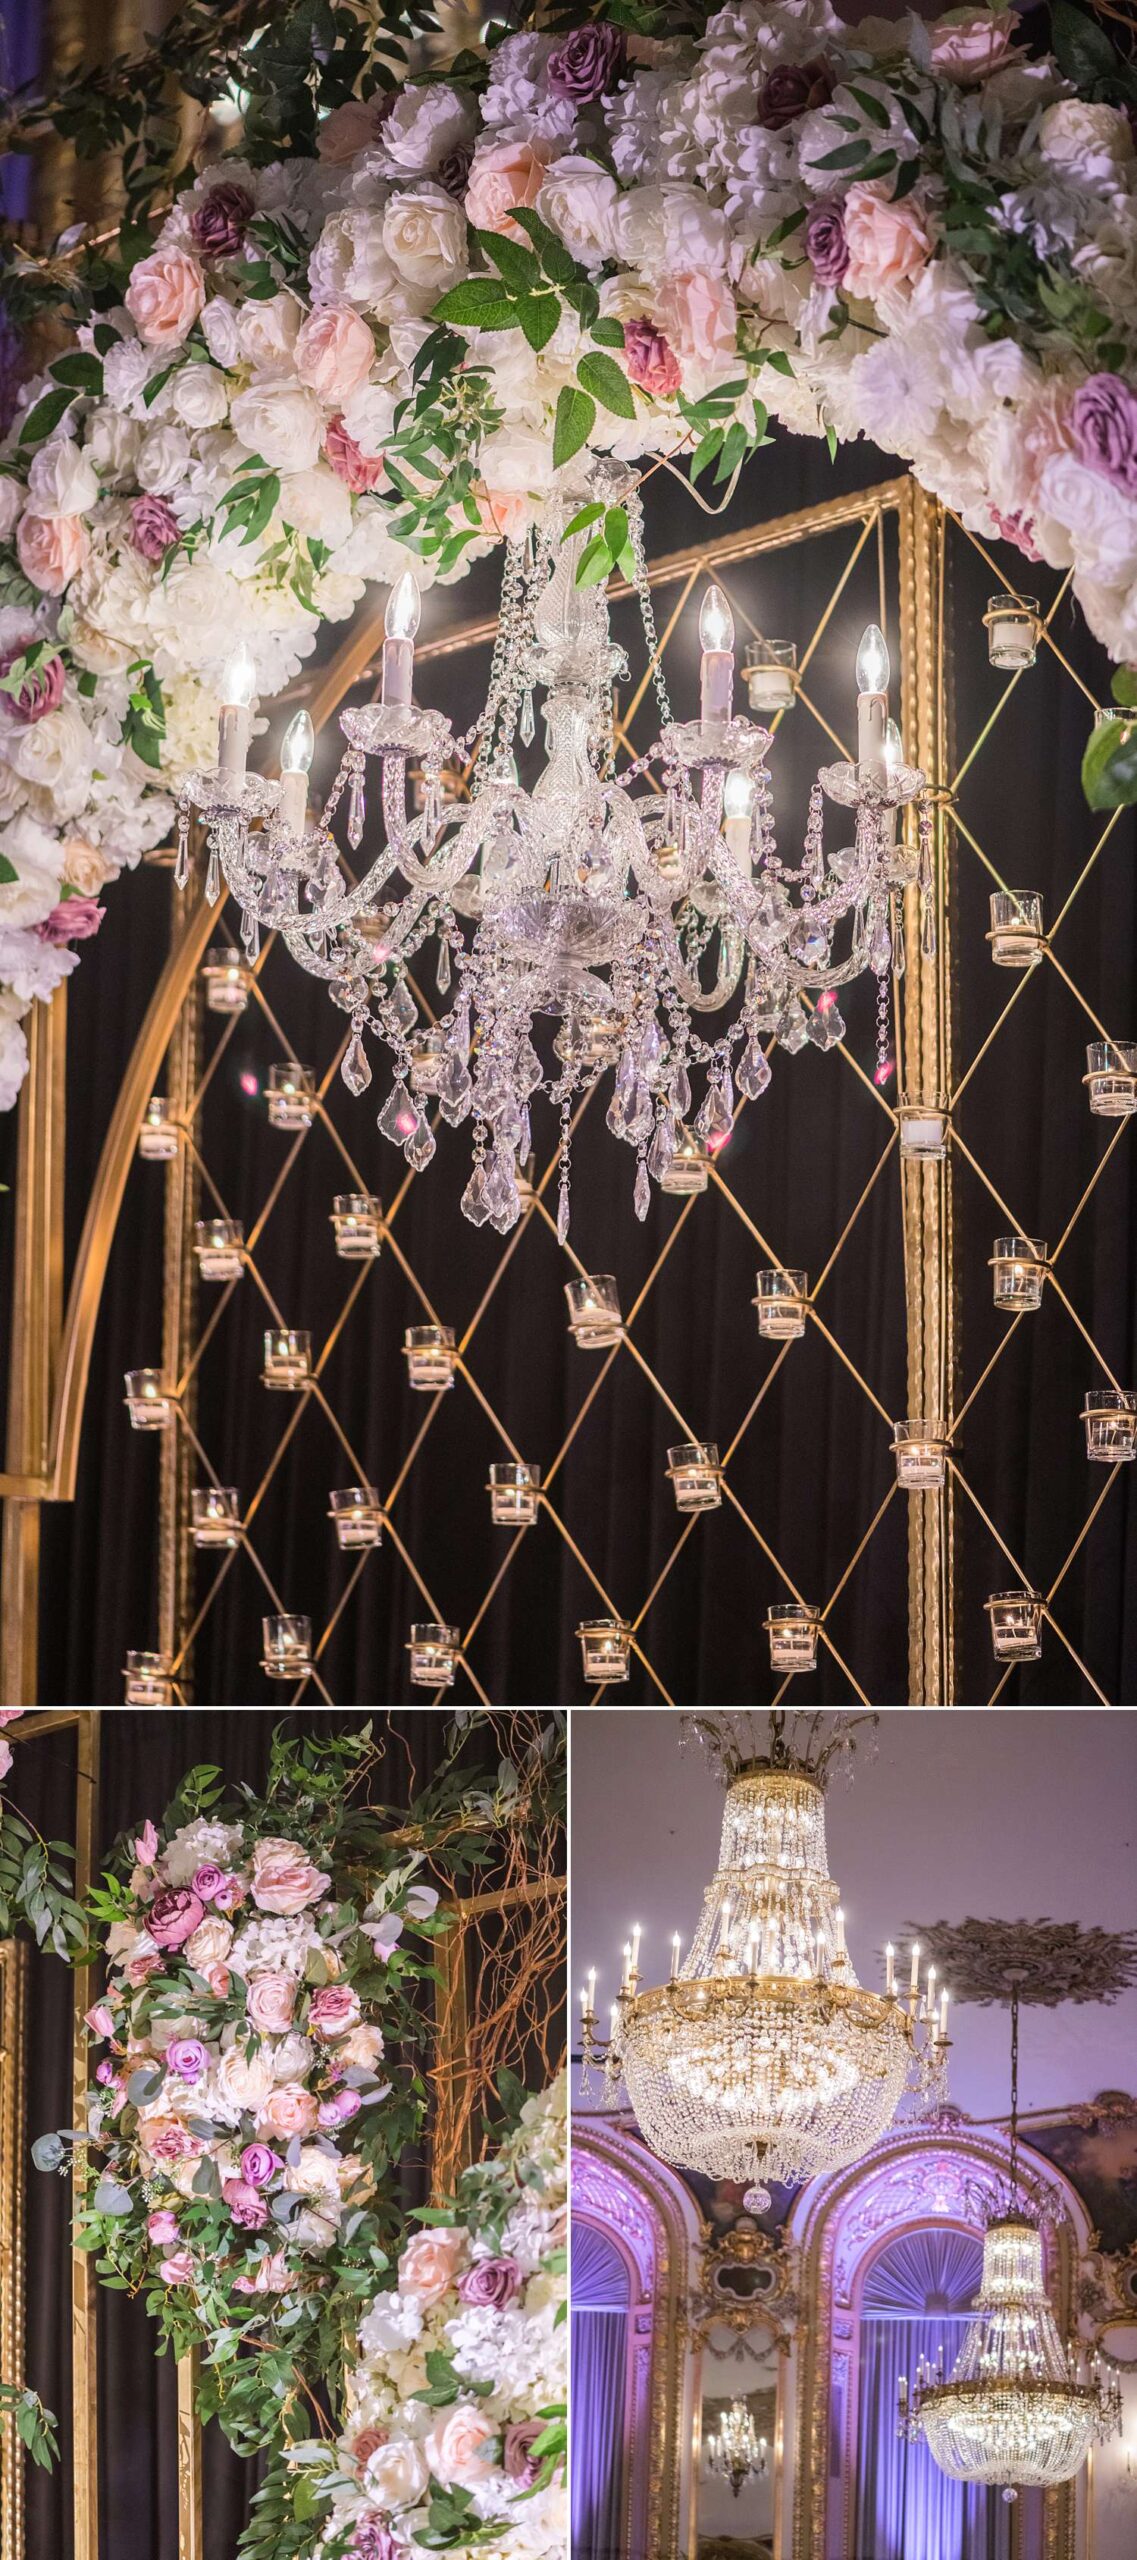 Chandelier and floral detail of Chicago wedding decor photos at Hilton